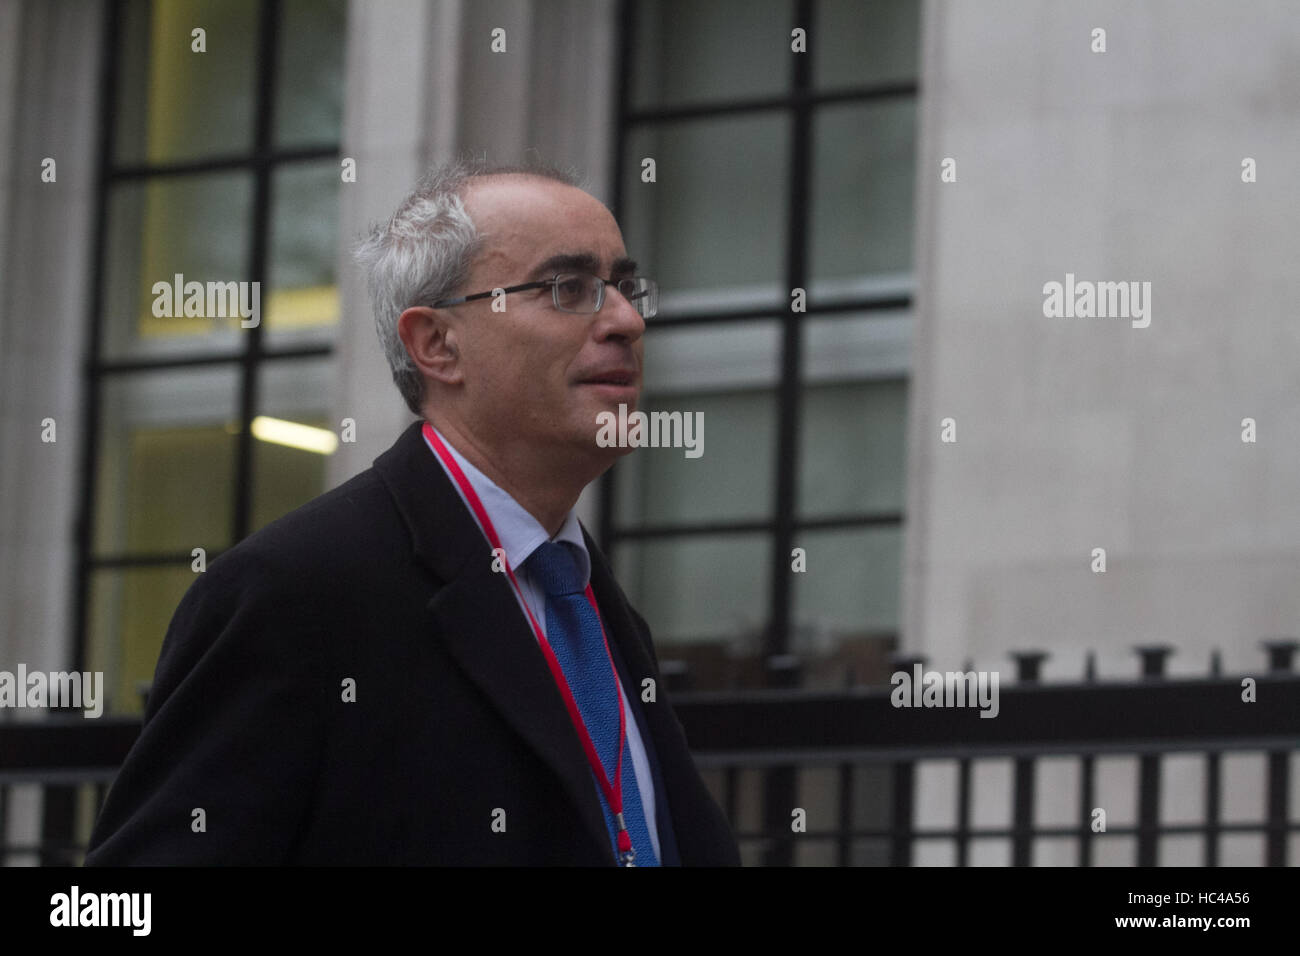 London UK. 8th December 2016. Lord Pannick QC for Gina Miller arrives at the Supreme Court on the final day of deliberations as the government seeks to overturn the High Court ruling  on whether parliament should debate Article 50 to allow Britain to leave the European Union. Gina Miller is the lead claimant who won the case at the High Court in November in the legal fight to get Parliament to vote on whether the UK can start the process of leaving the EU. Credit:  amer ghazzal/Alamy Live News Stock Photo